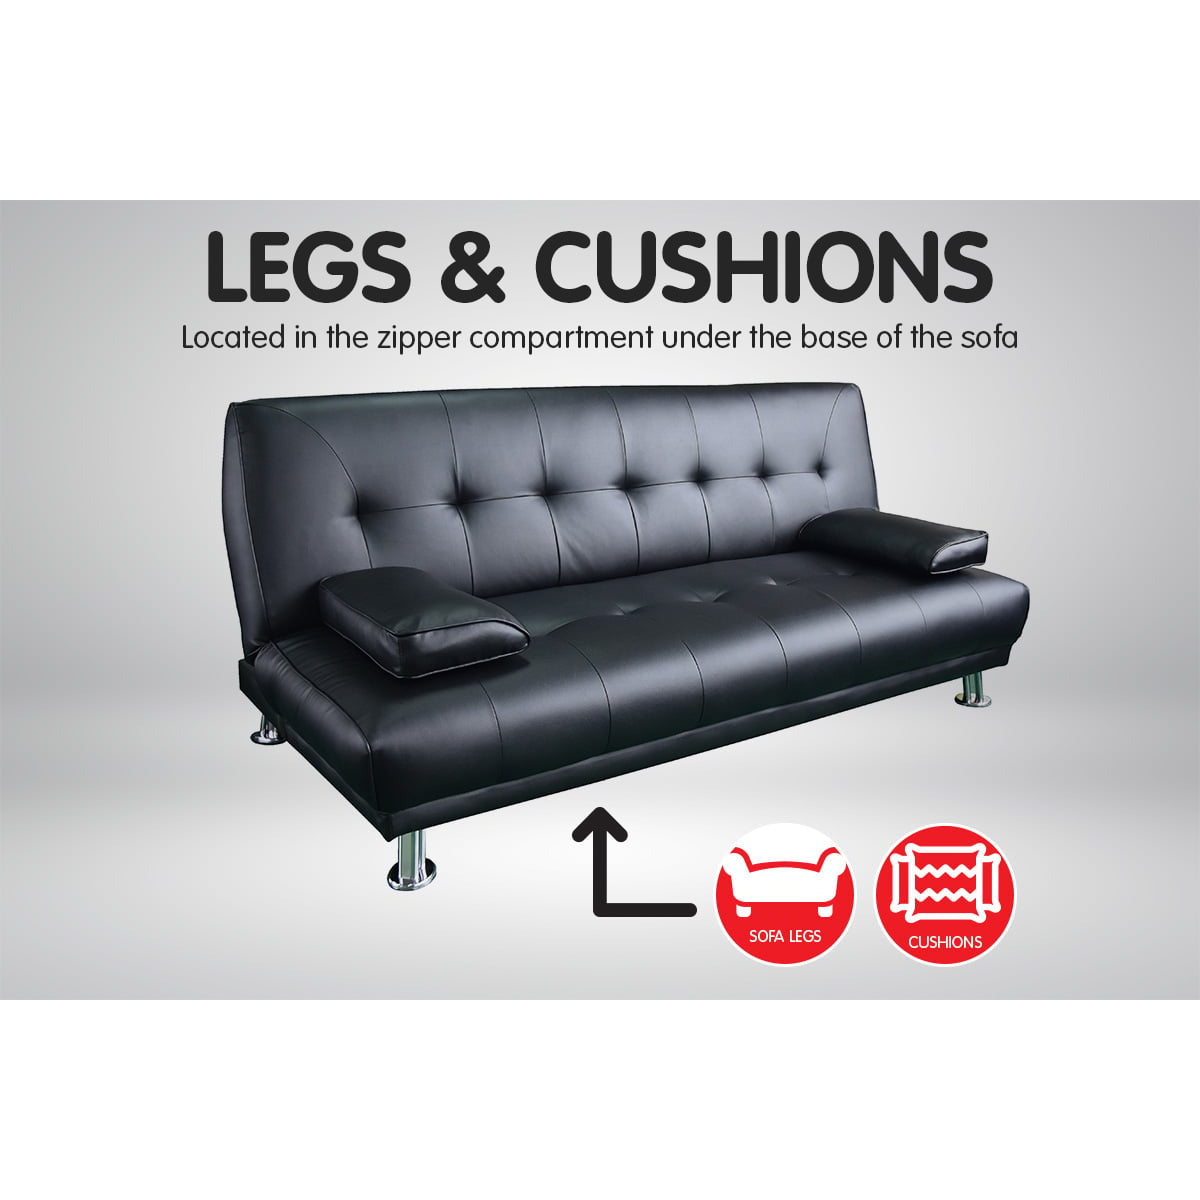 Sarantino 3 Seater Faux Leather Sofa Bed Couch Lounge Futon - Black